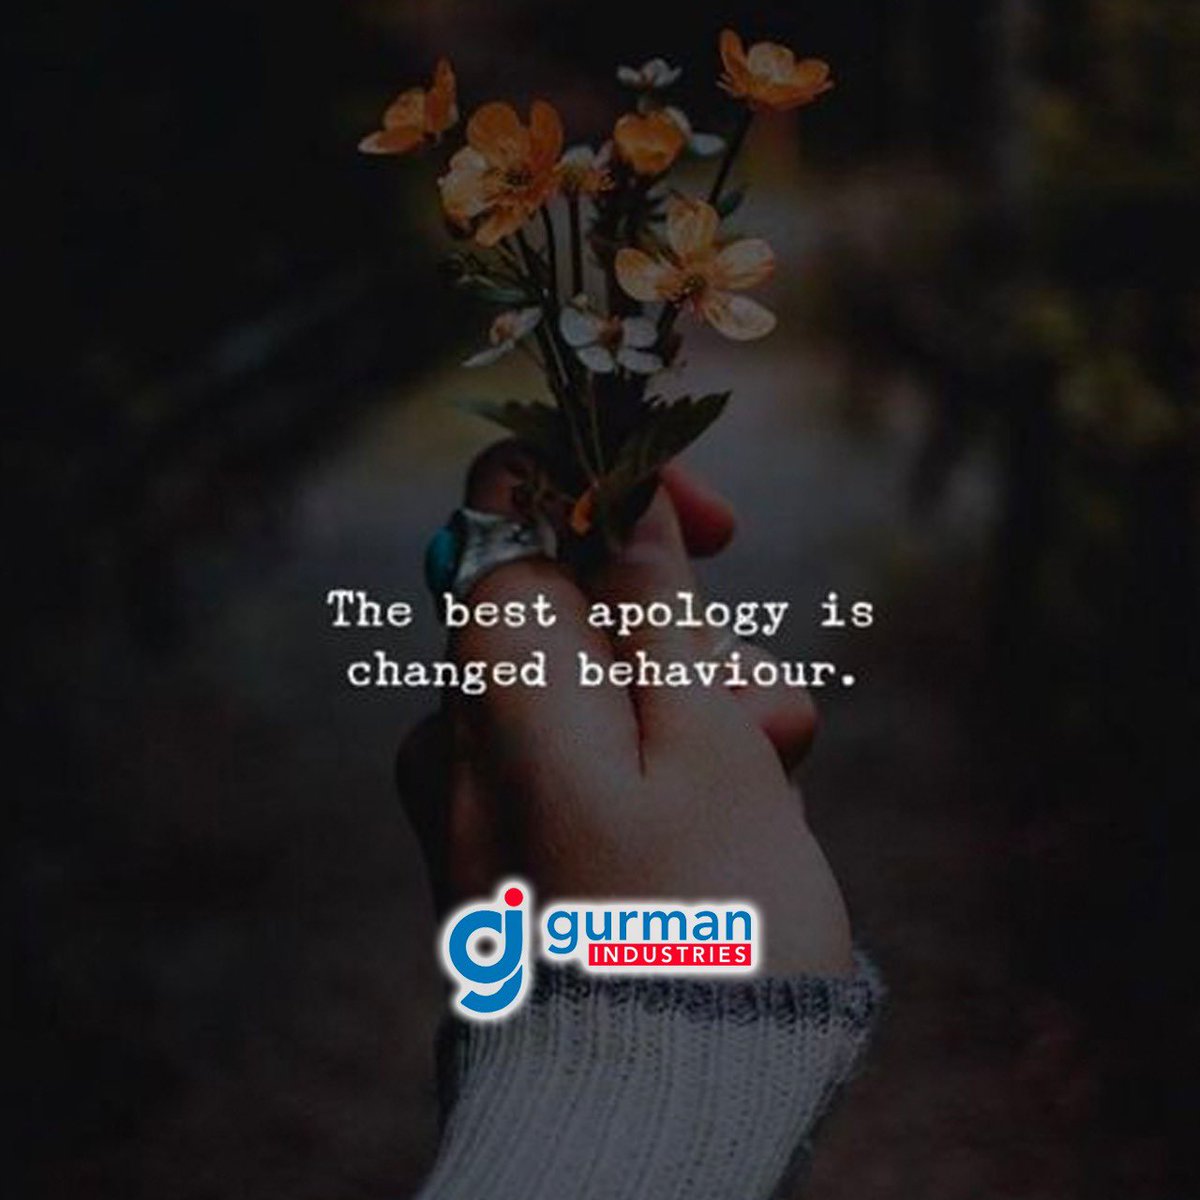 #The #Best #Apology #Is #Changed #Behaviour #GurmanIndustries